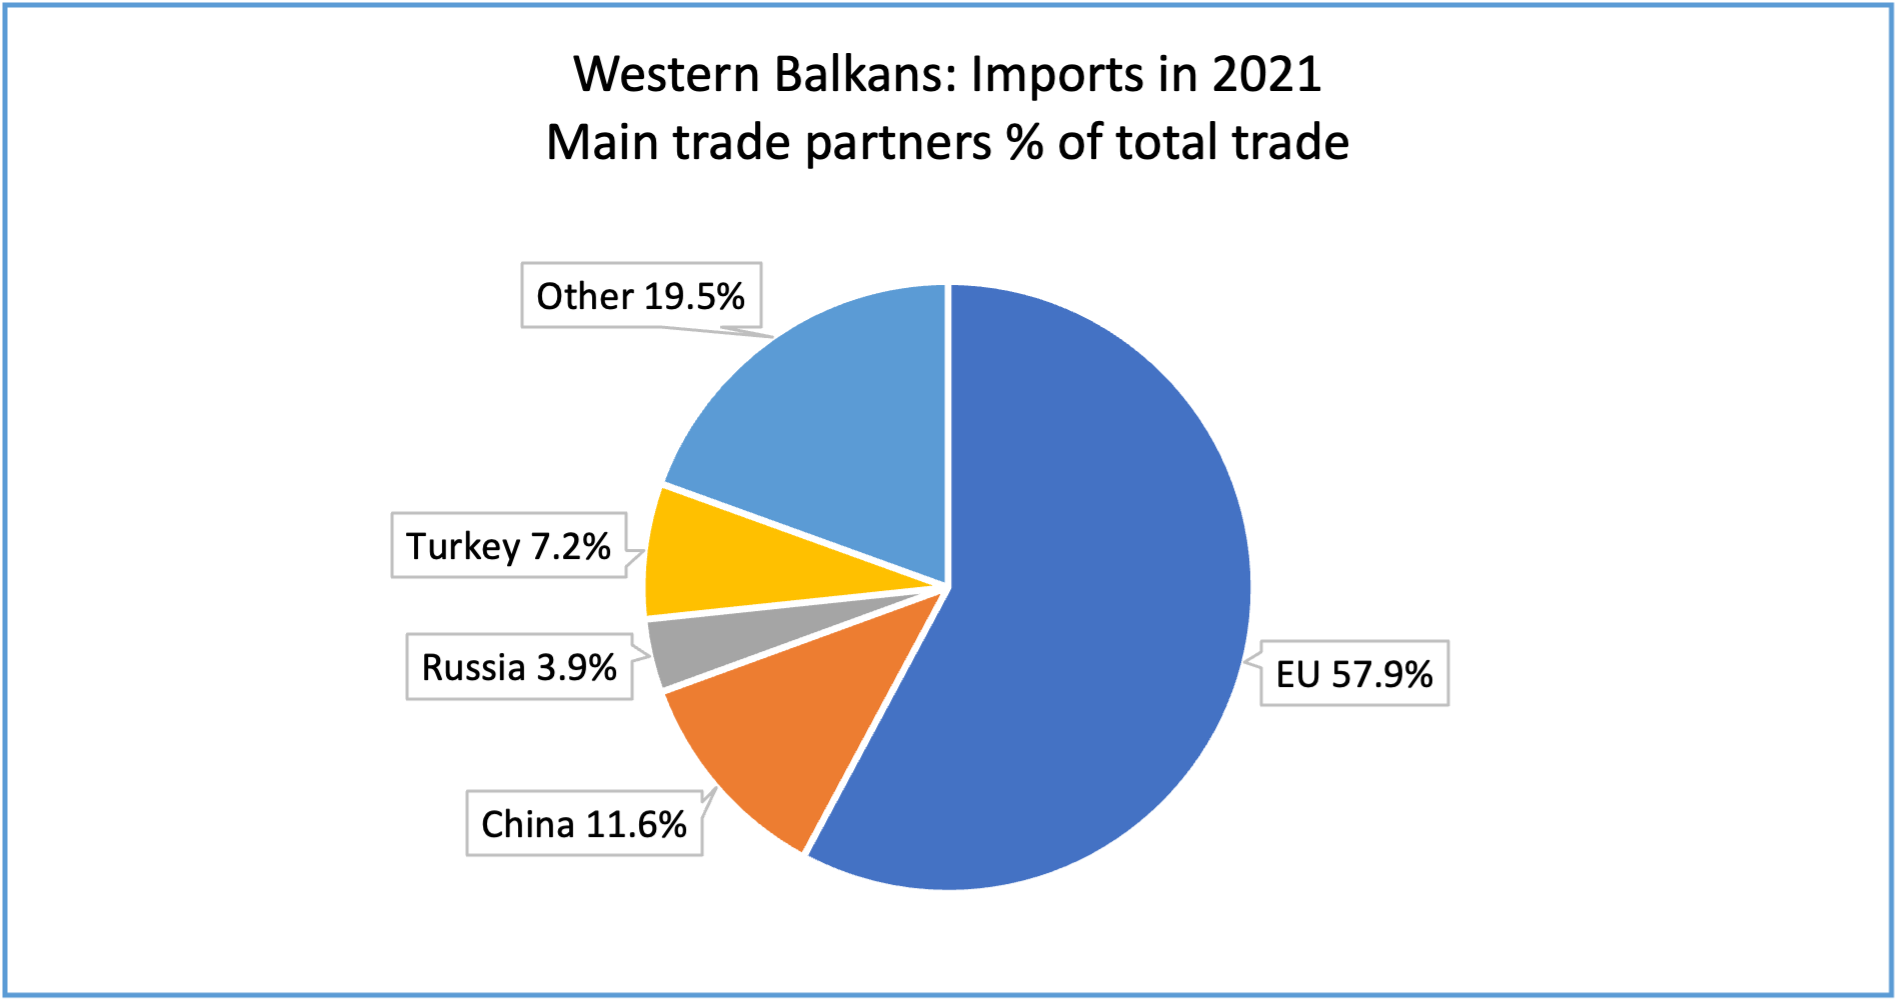 Western Balkans: Main Trade Partners in 2021 (Imports as % of total)